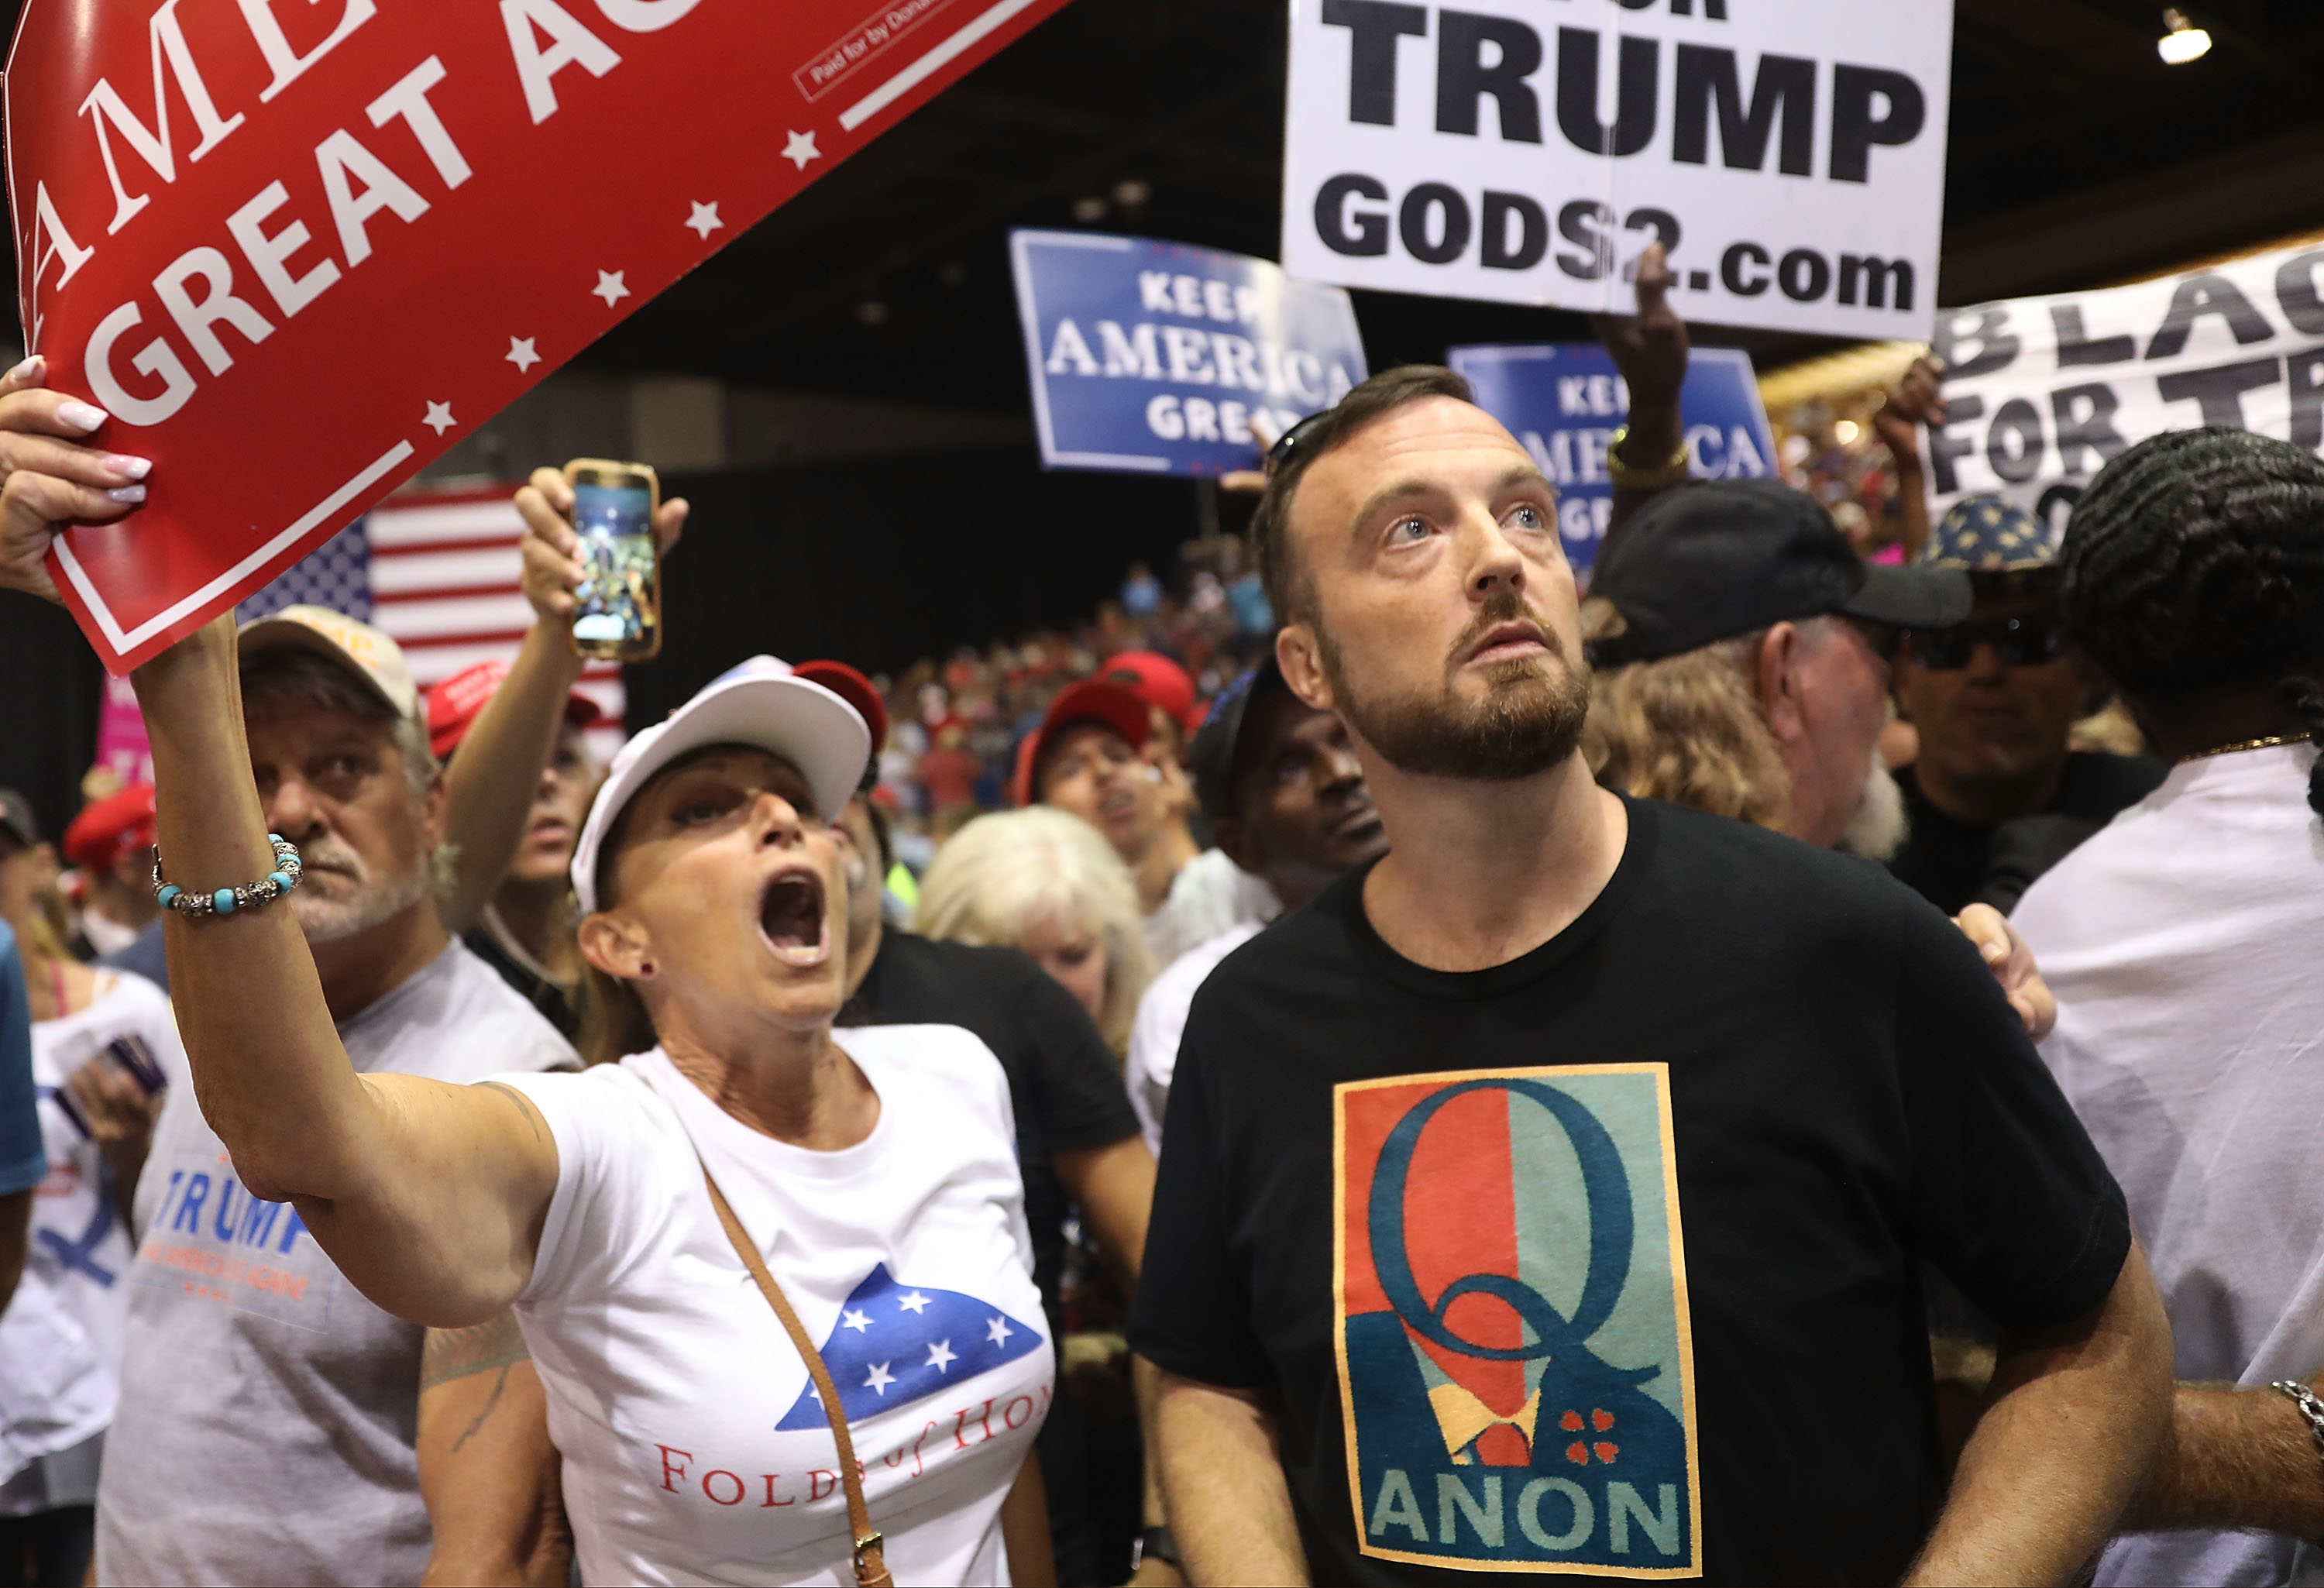 Why People Believe QAnon's Trump Conspiracy Theory | Time